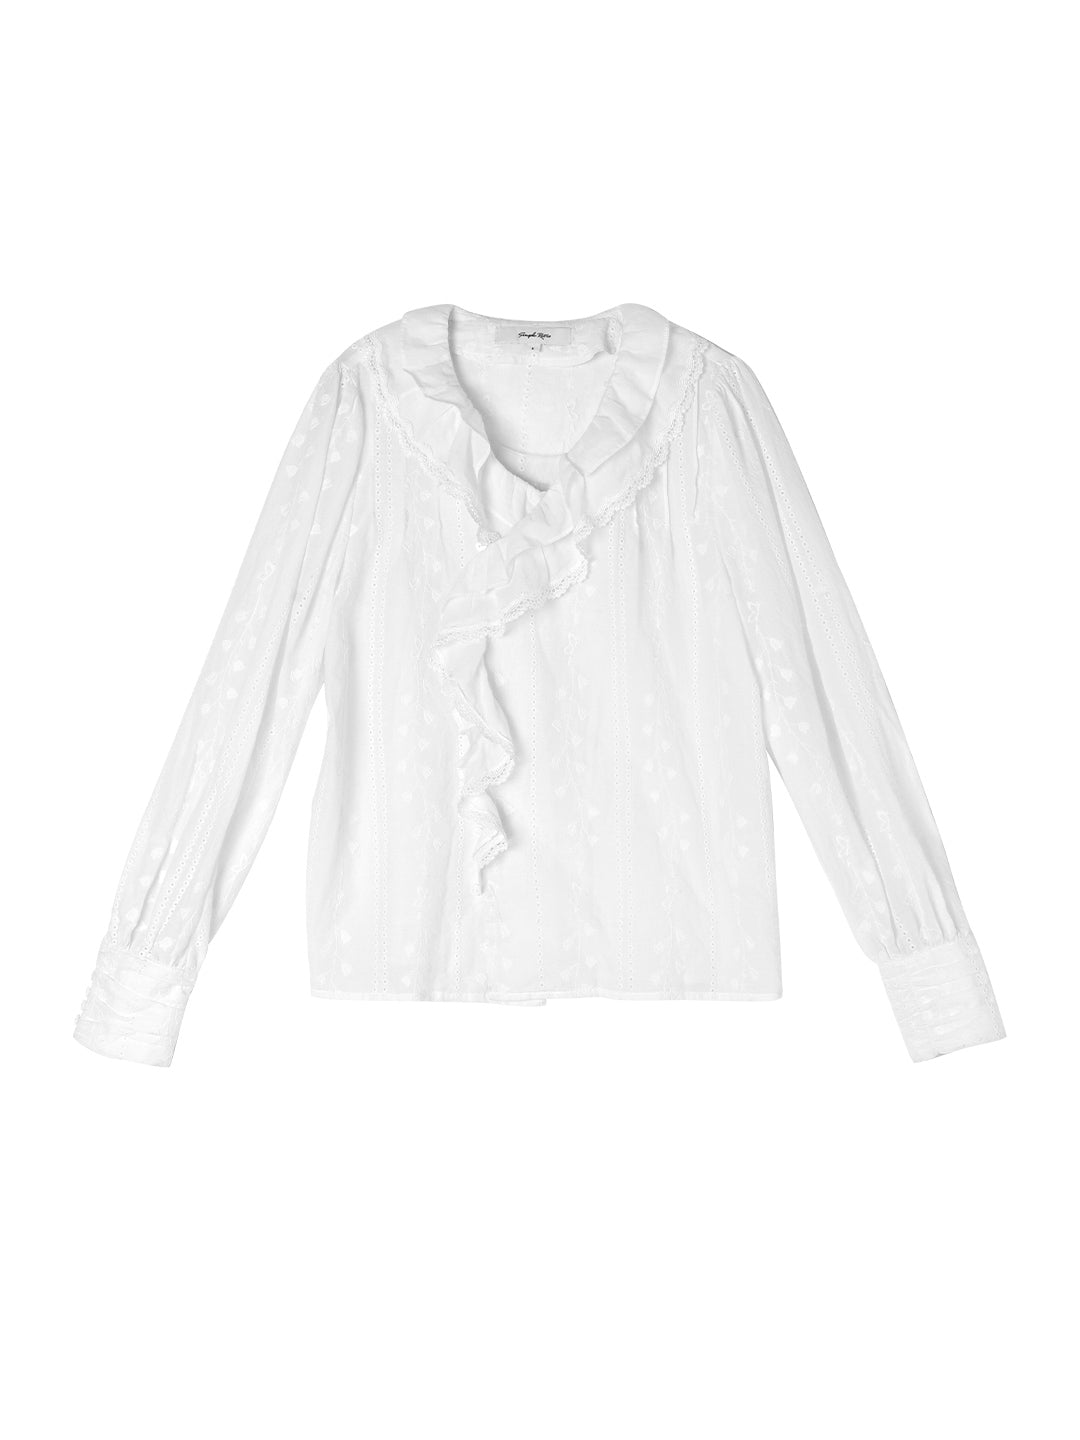 Lilyana Ruffle White Floral Embroidered Blouse/Simple Retro/66057